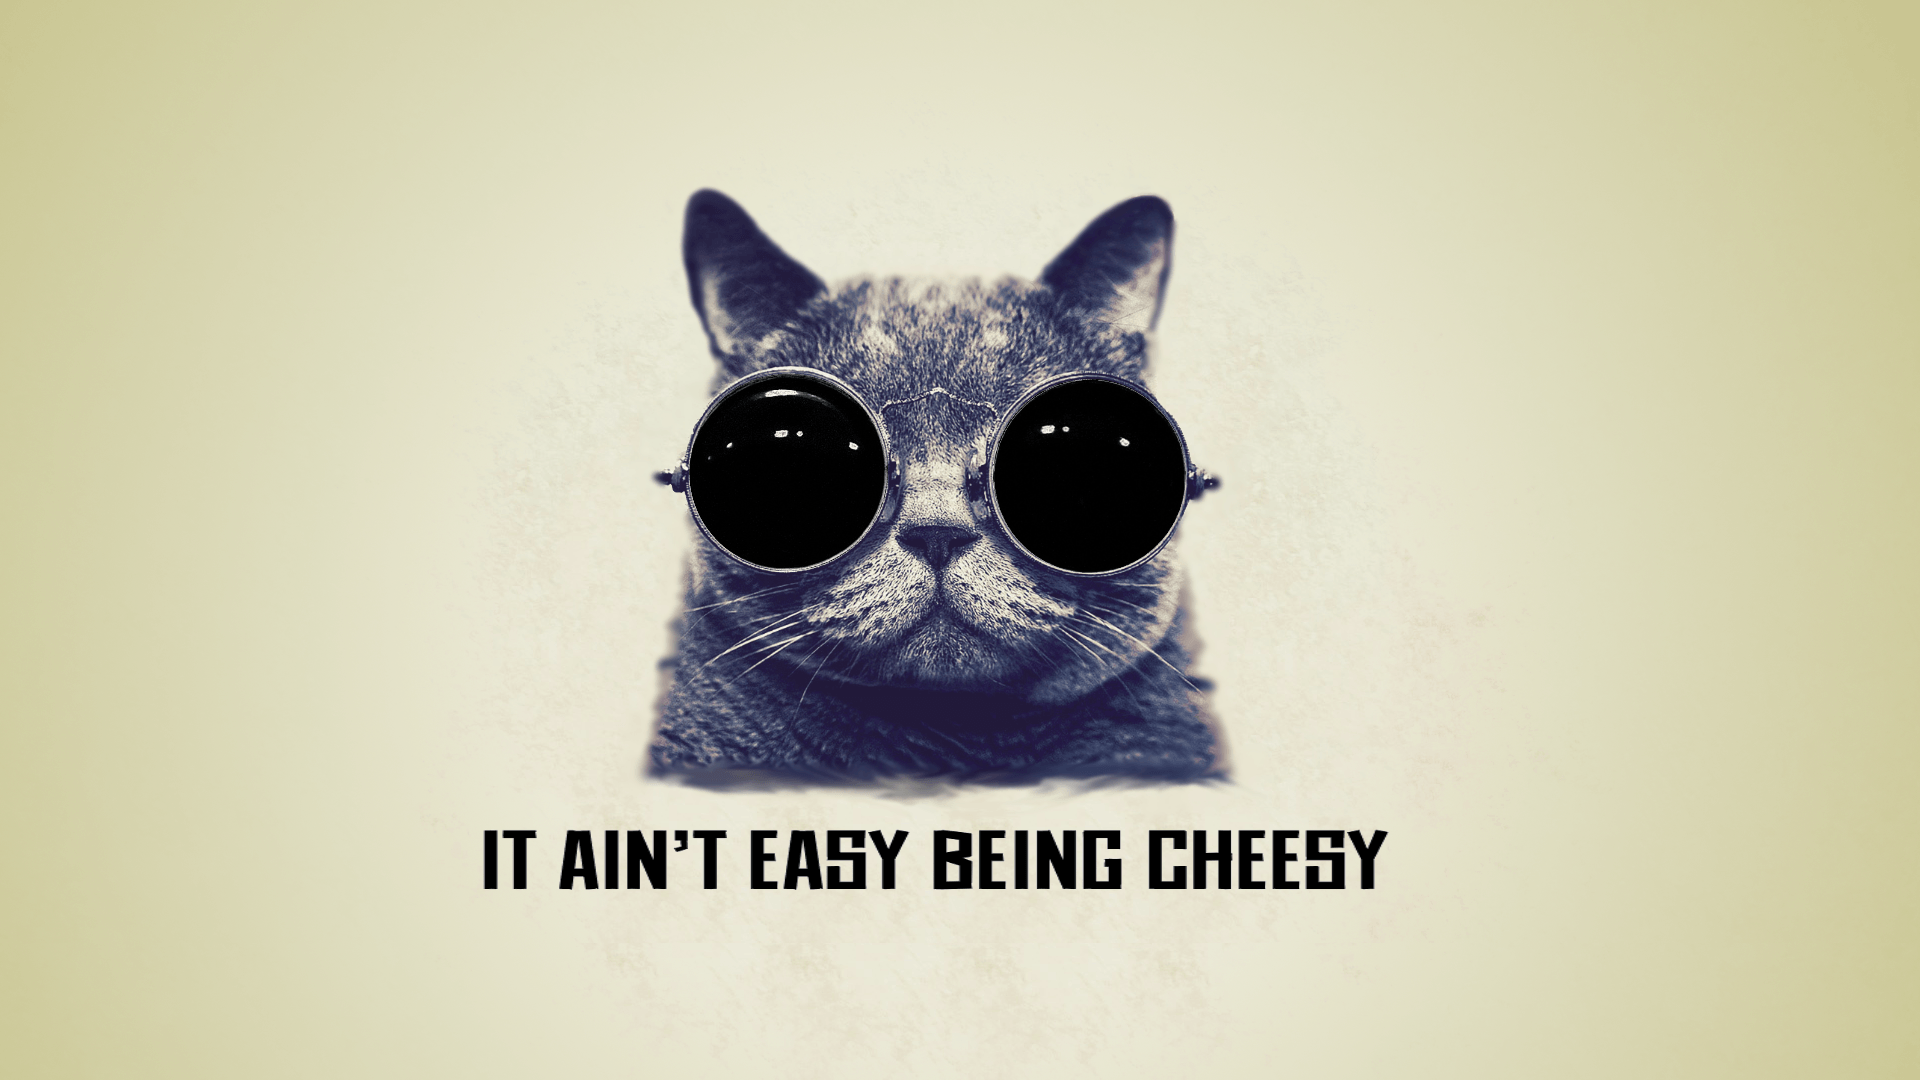 It ain't easy being cheesy cool cat wallpaper